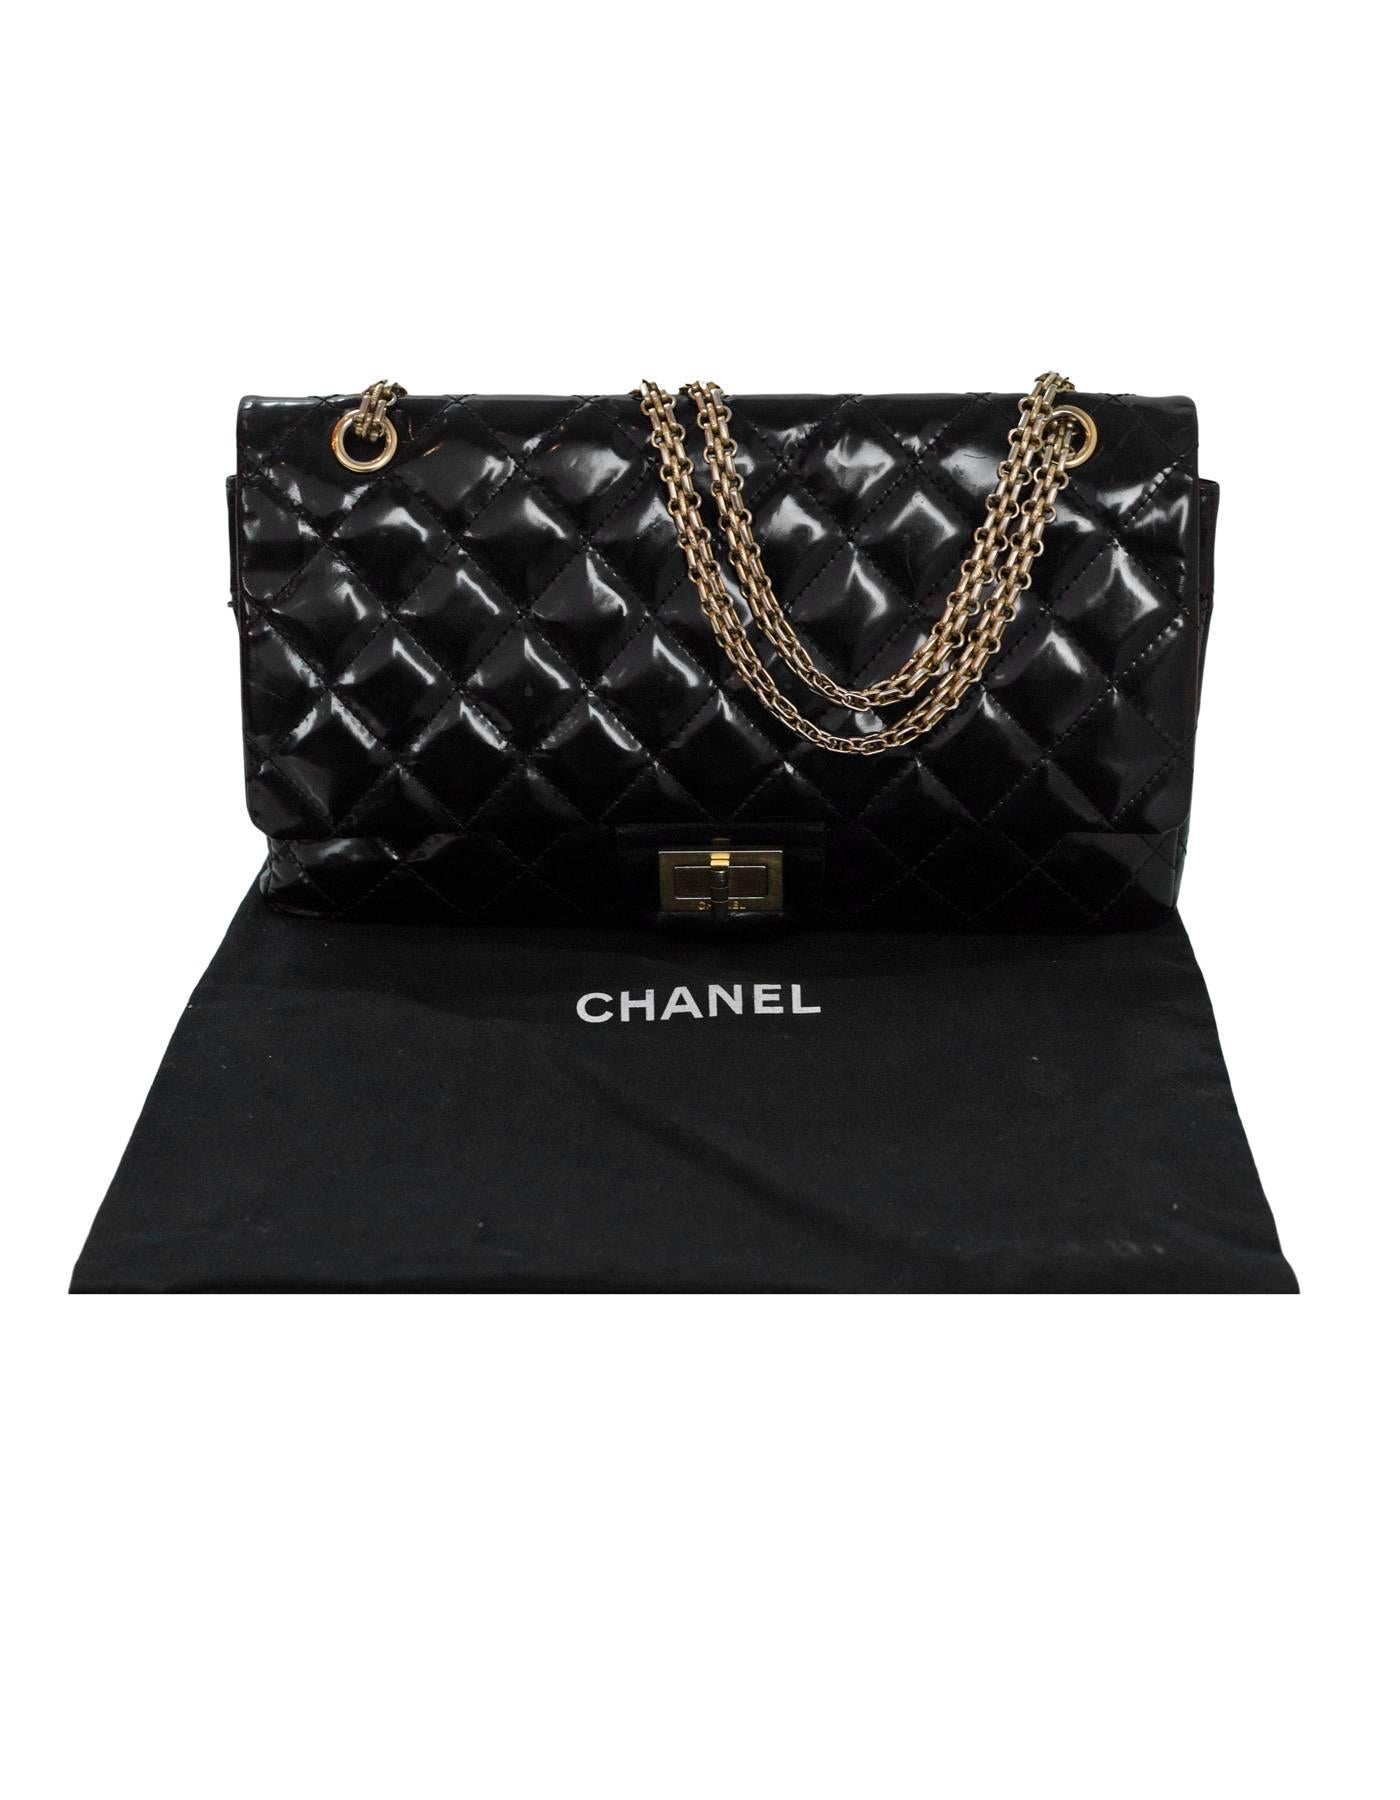 Chanel Black Patent Leather 2.55 Re-Issue 227 Double Flap Bag 6